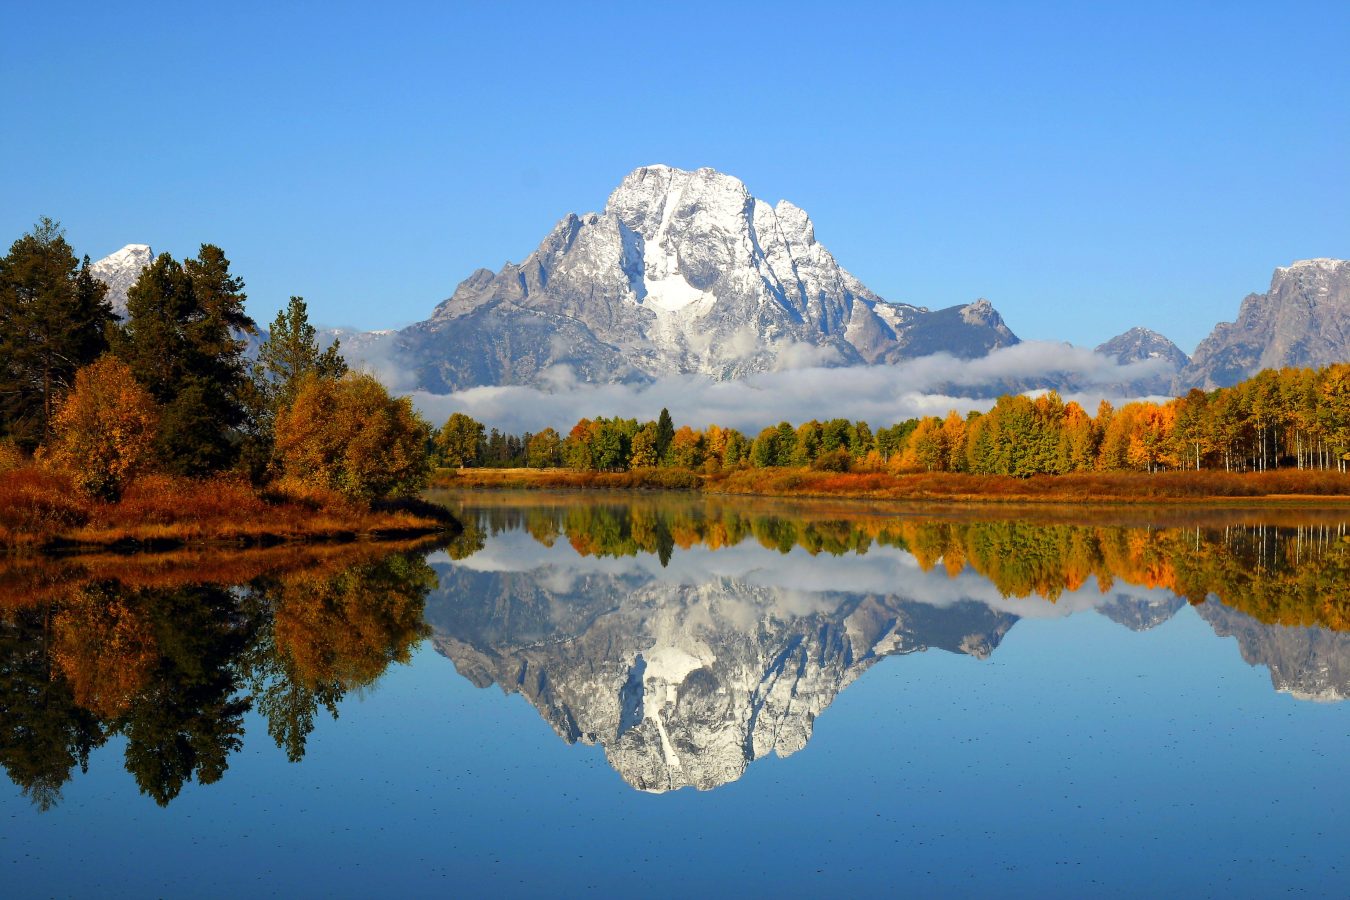 Reflection of the mountain range in a lake at Grand Teton National Park.